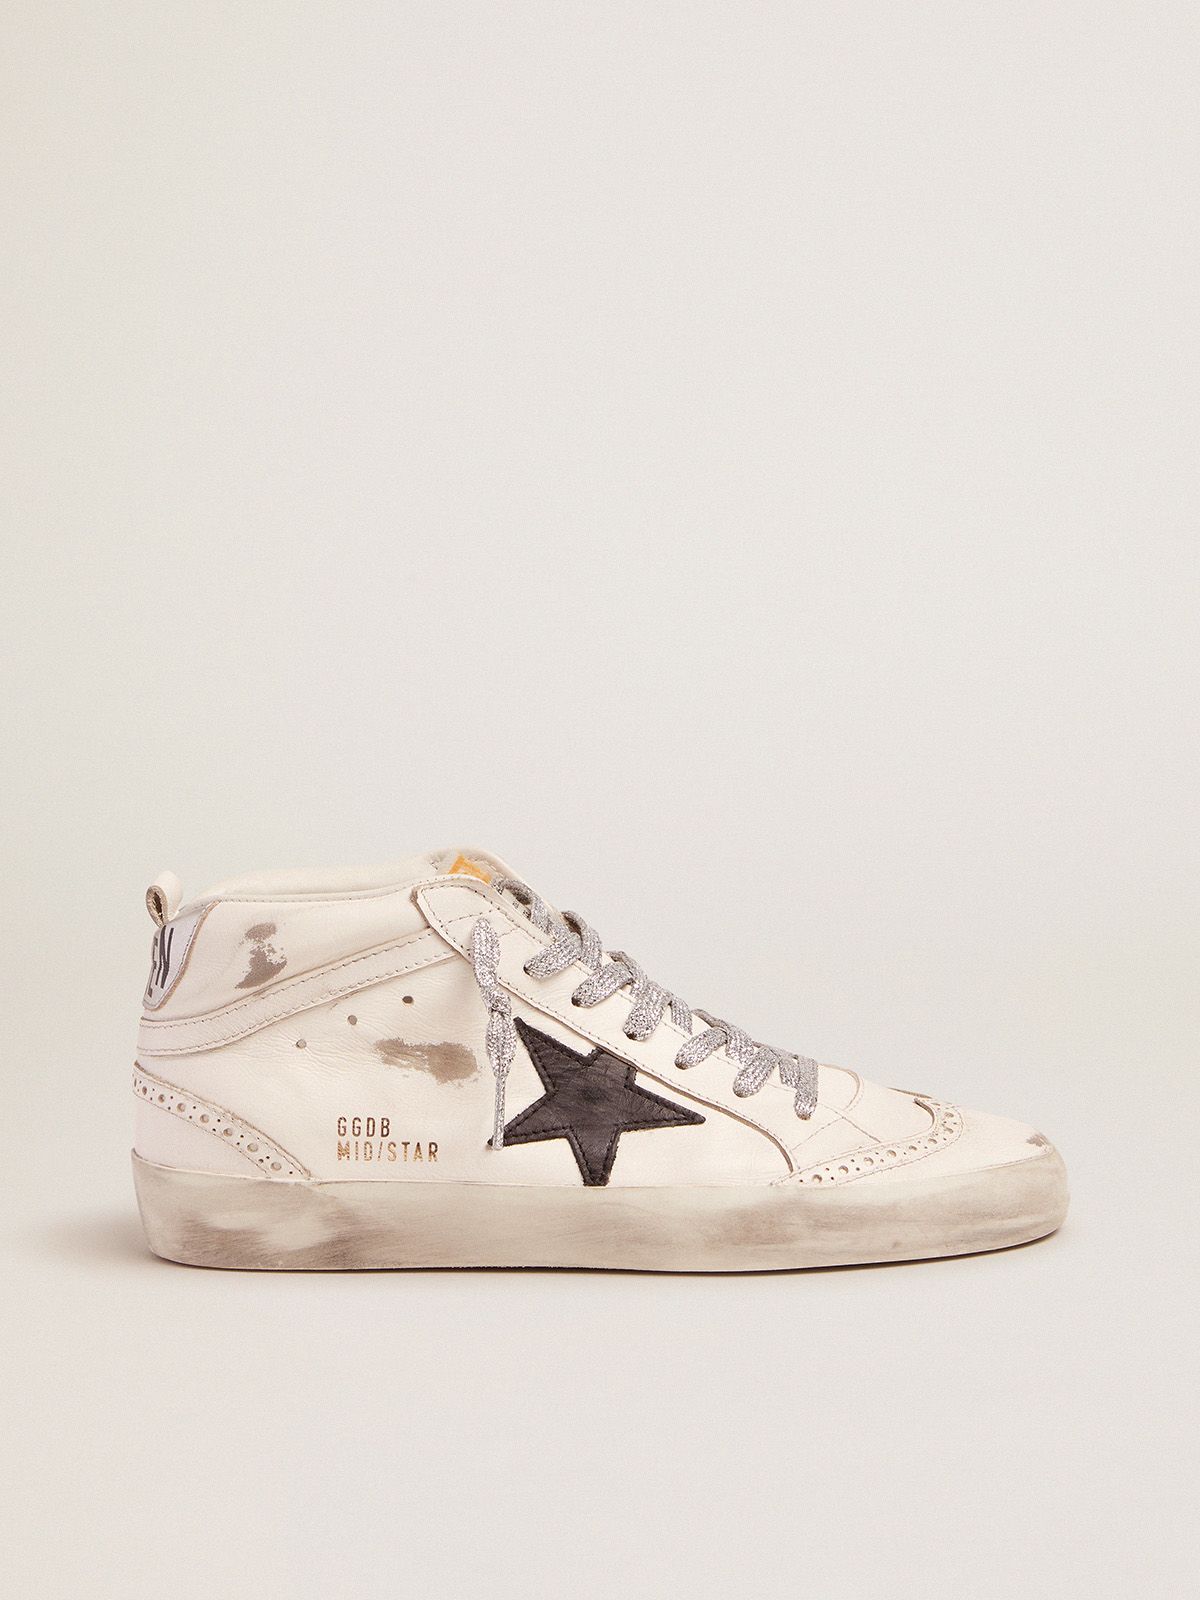 Golden Goose Sneakers Uomo Mid-Star sneakers with laminated heel tab and glittery laces